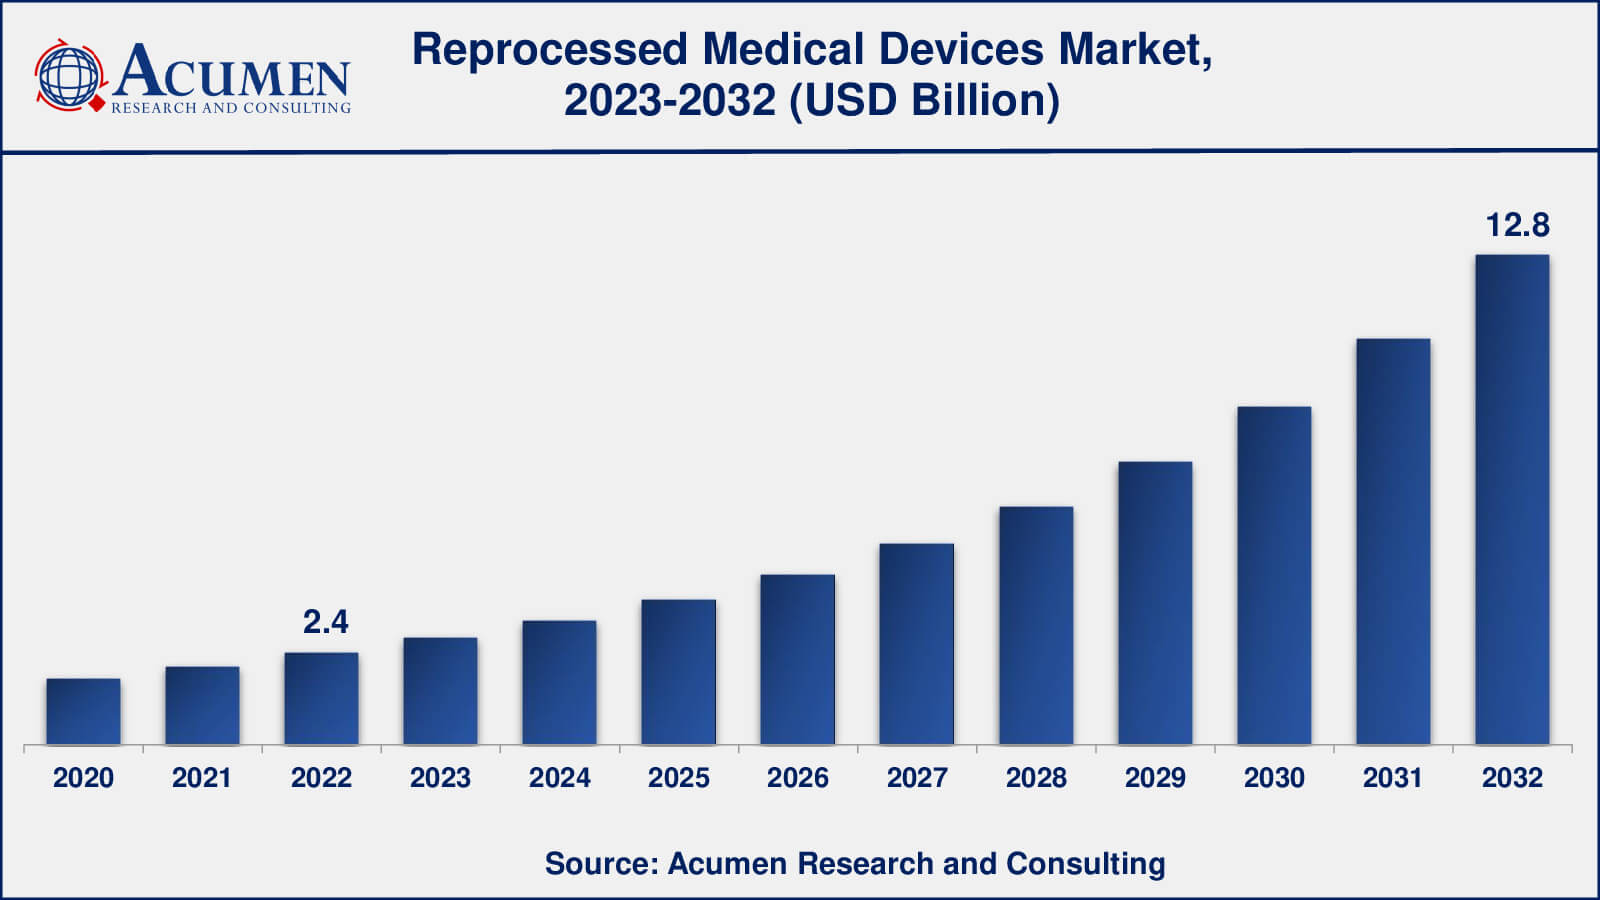 Reprocessed Medical Devices Market Analysis